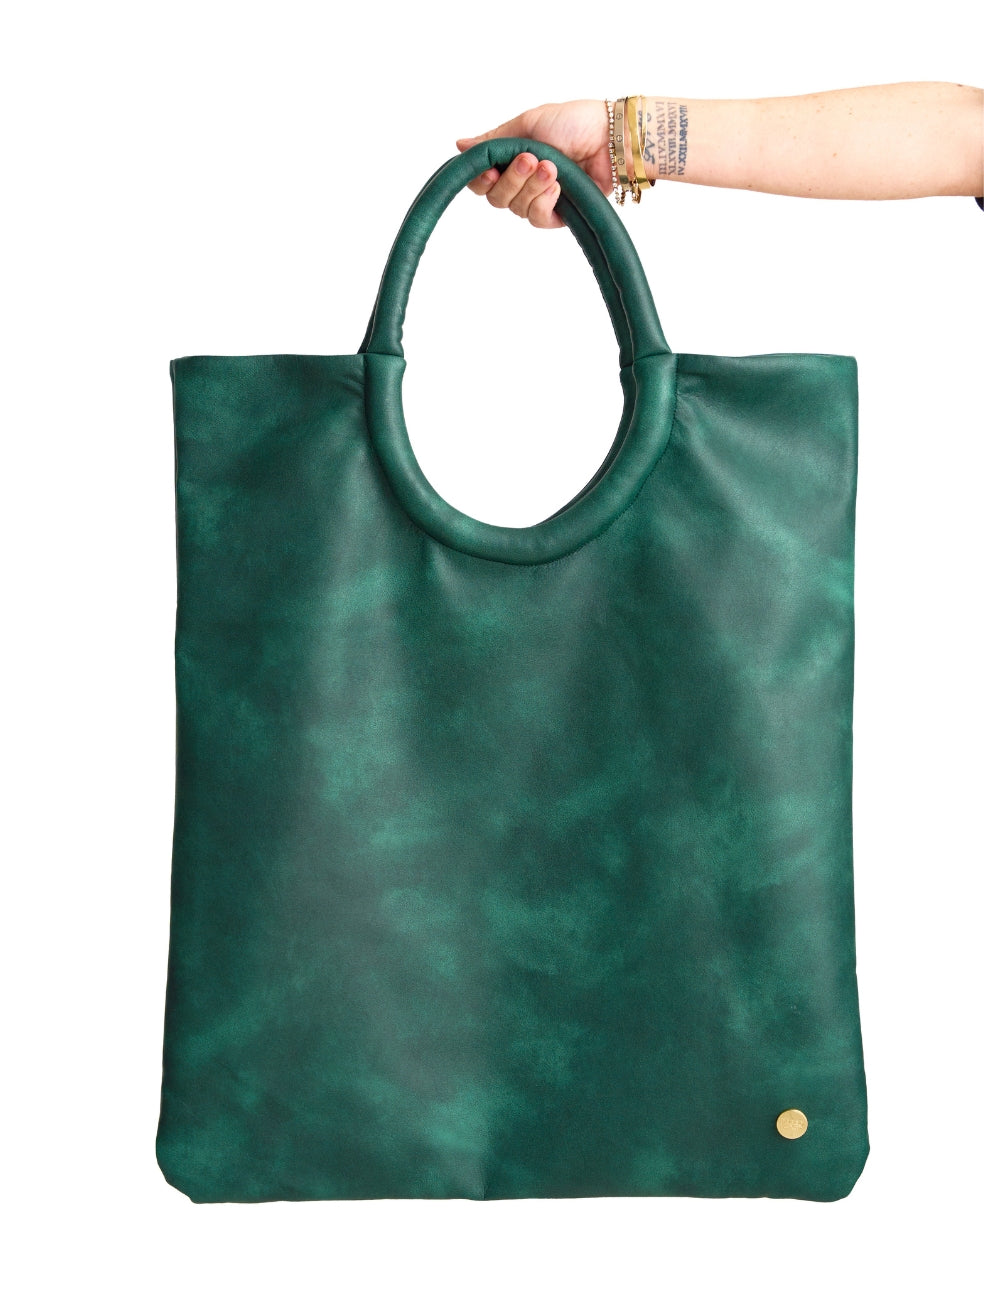 24 hour tote work travel bag oversized animal free leather pine green distressed